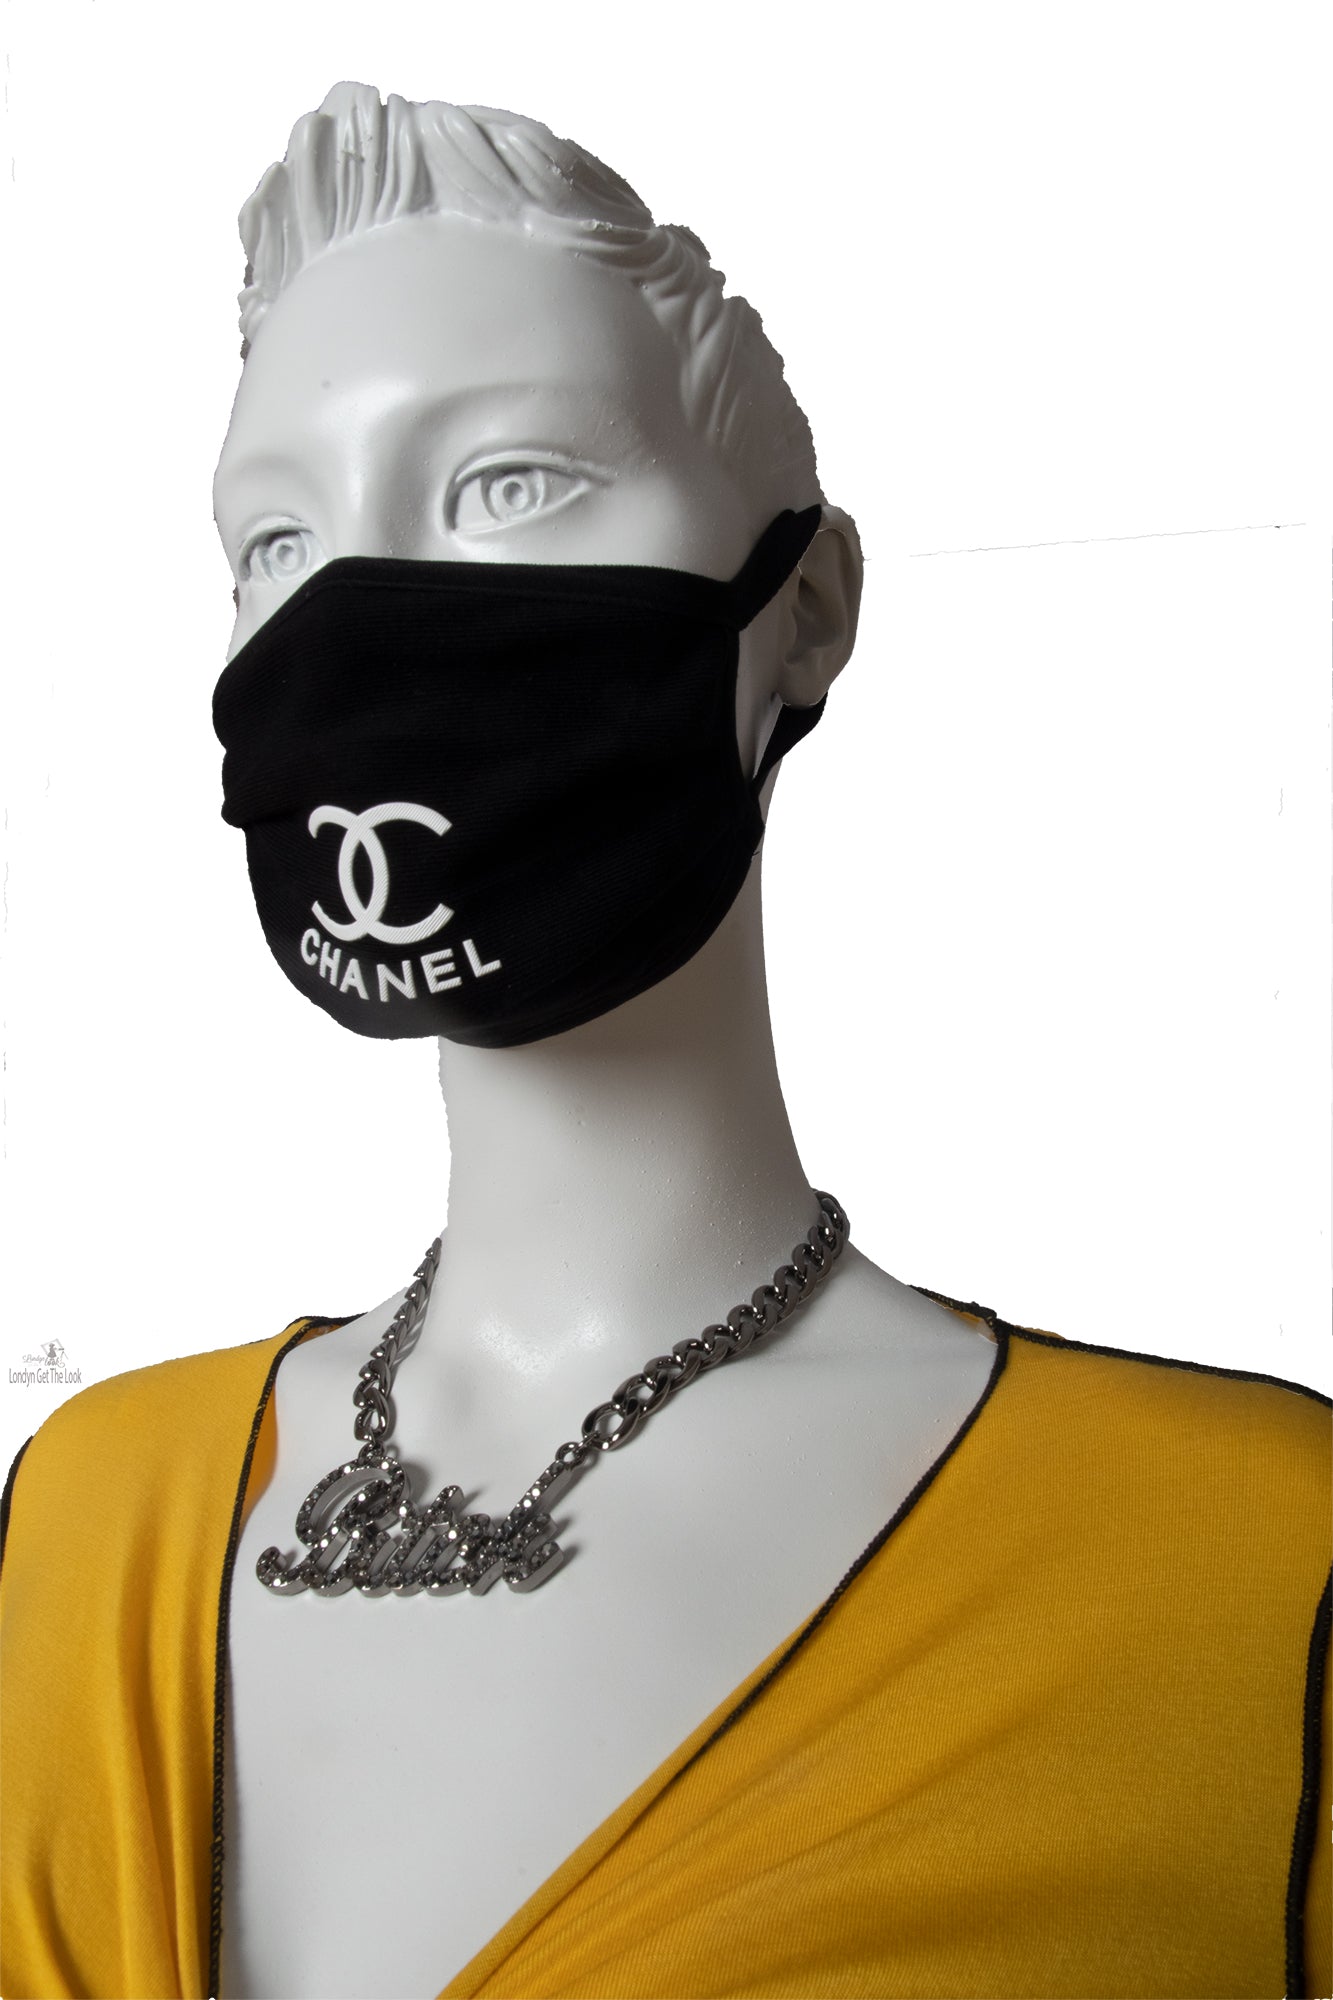 reusable washable Luxury Fashion Face Mask are pleated for better contoured and comfort fit, nasal mouth and underneath chin are fully covered Lightweight Double-layered Elastic ear loops.